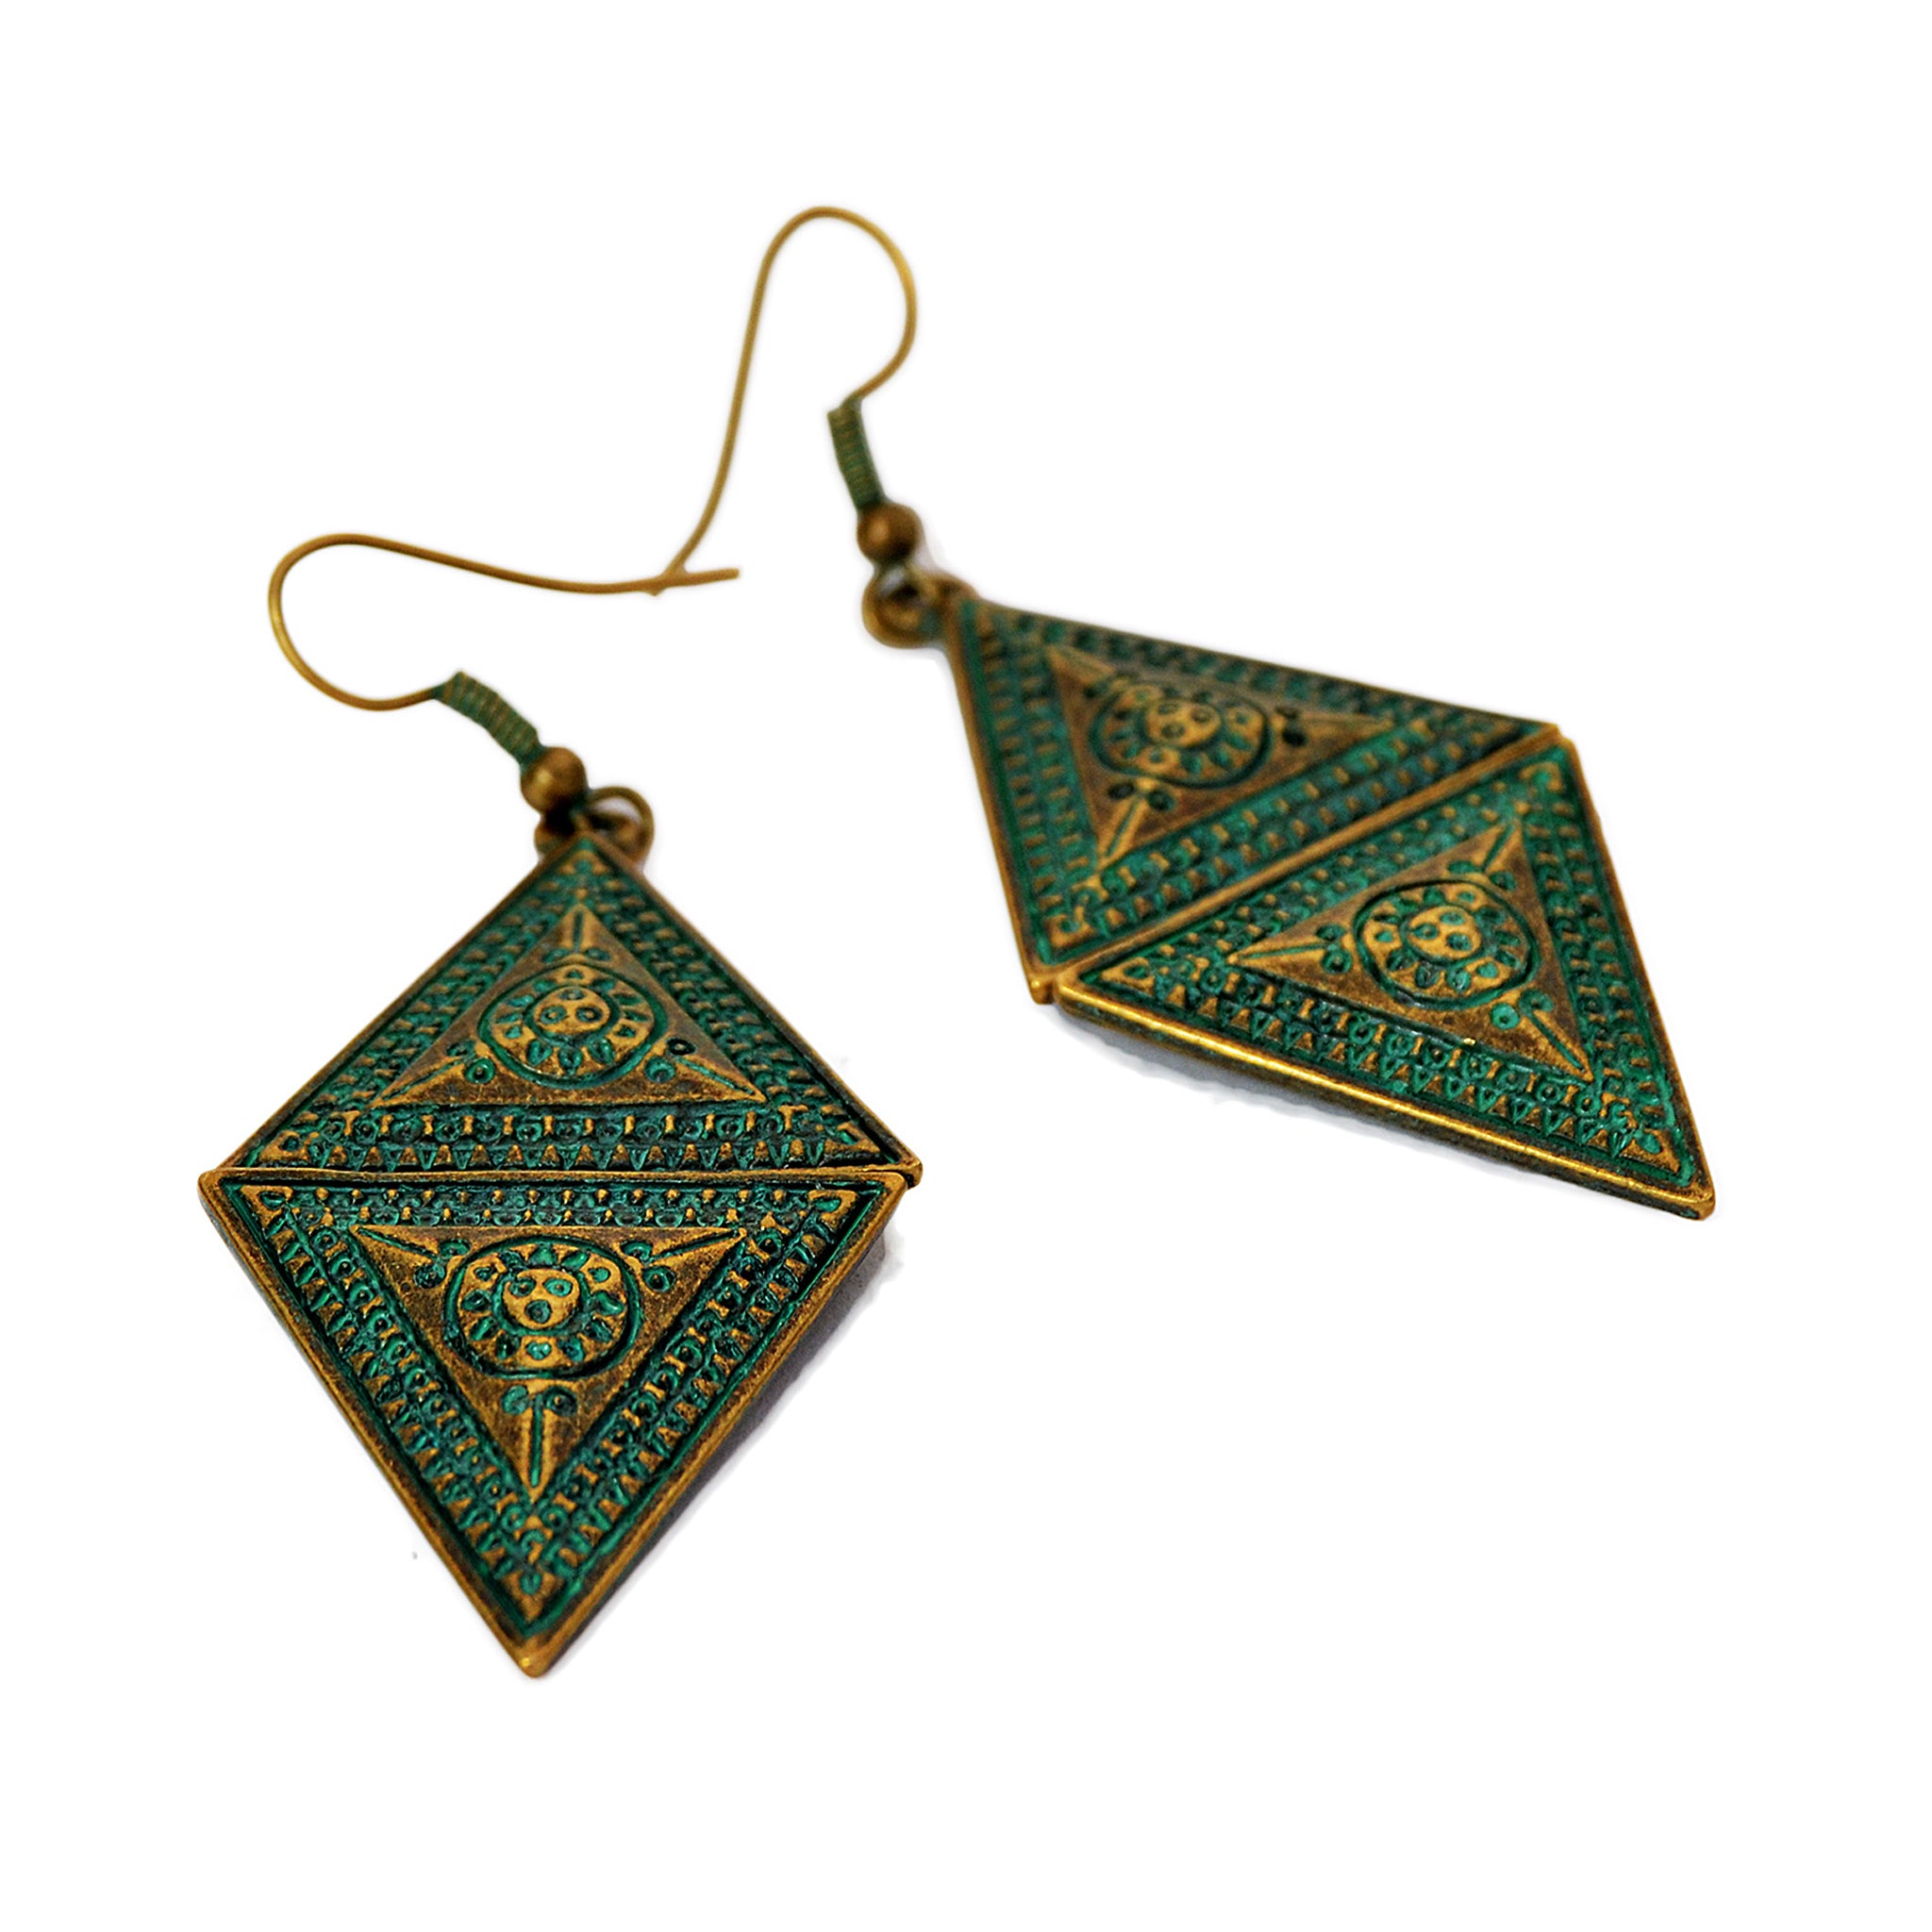 Dangly triangle earrings with tribal aztec design and green aged patina on brass